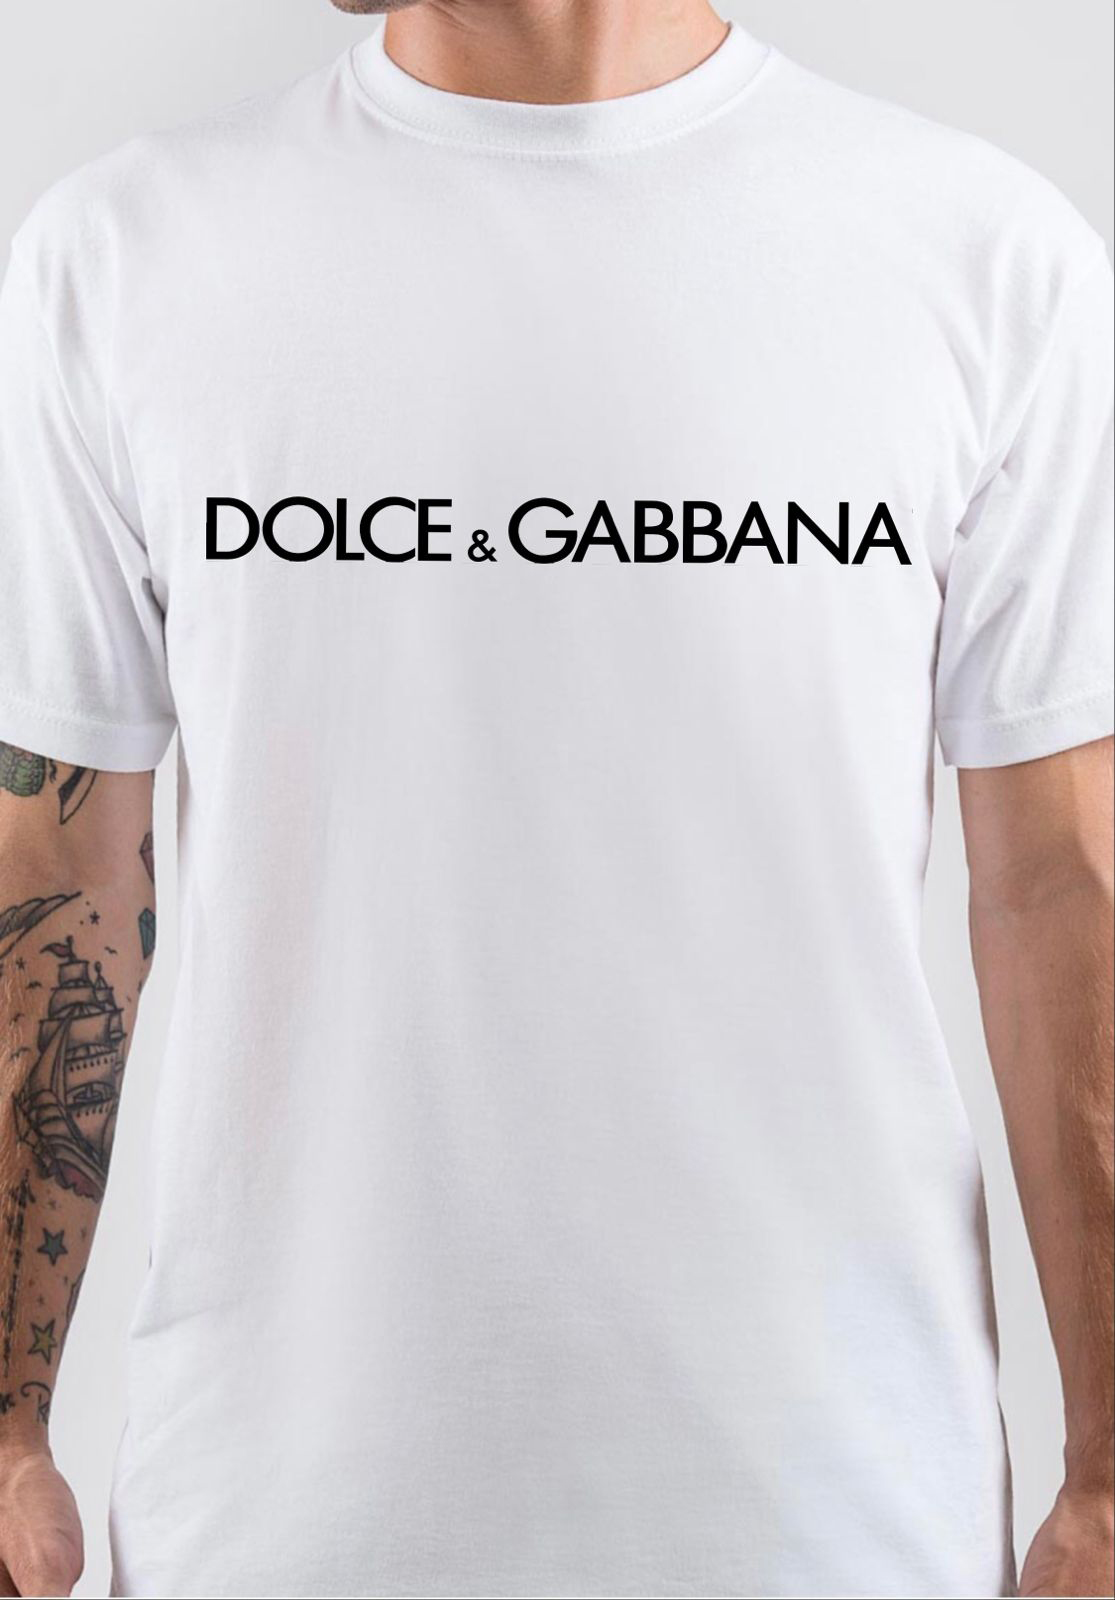 Top 62+ imagen dolce and gabbana size chart mens - Abzlocal.mx